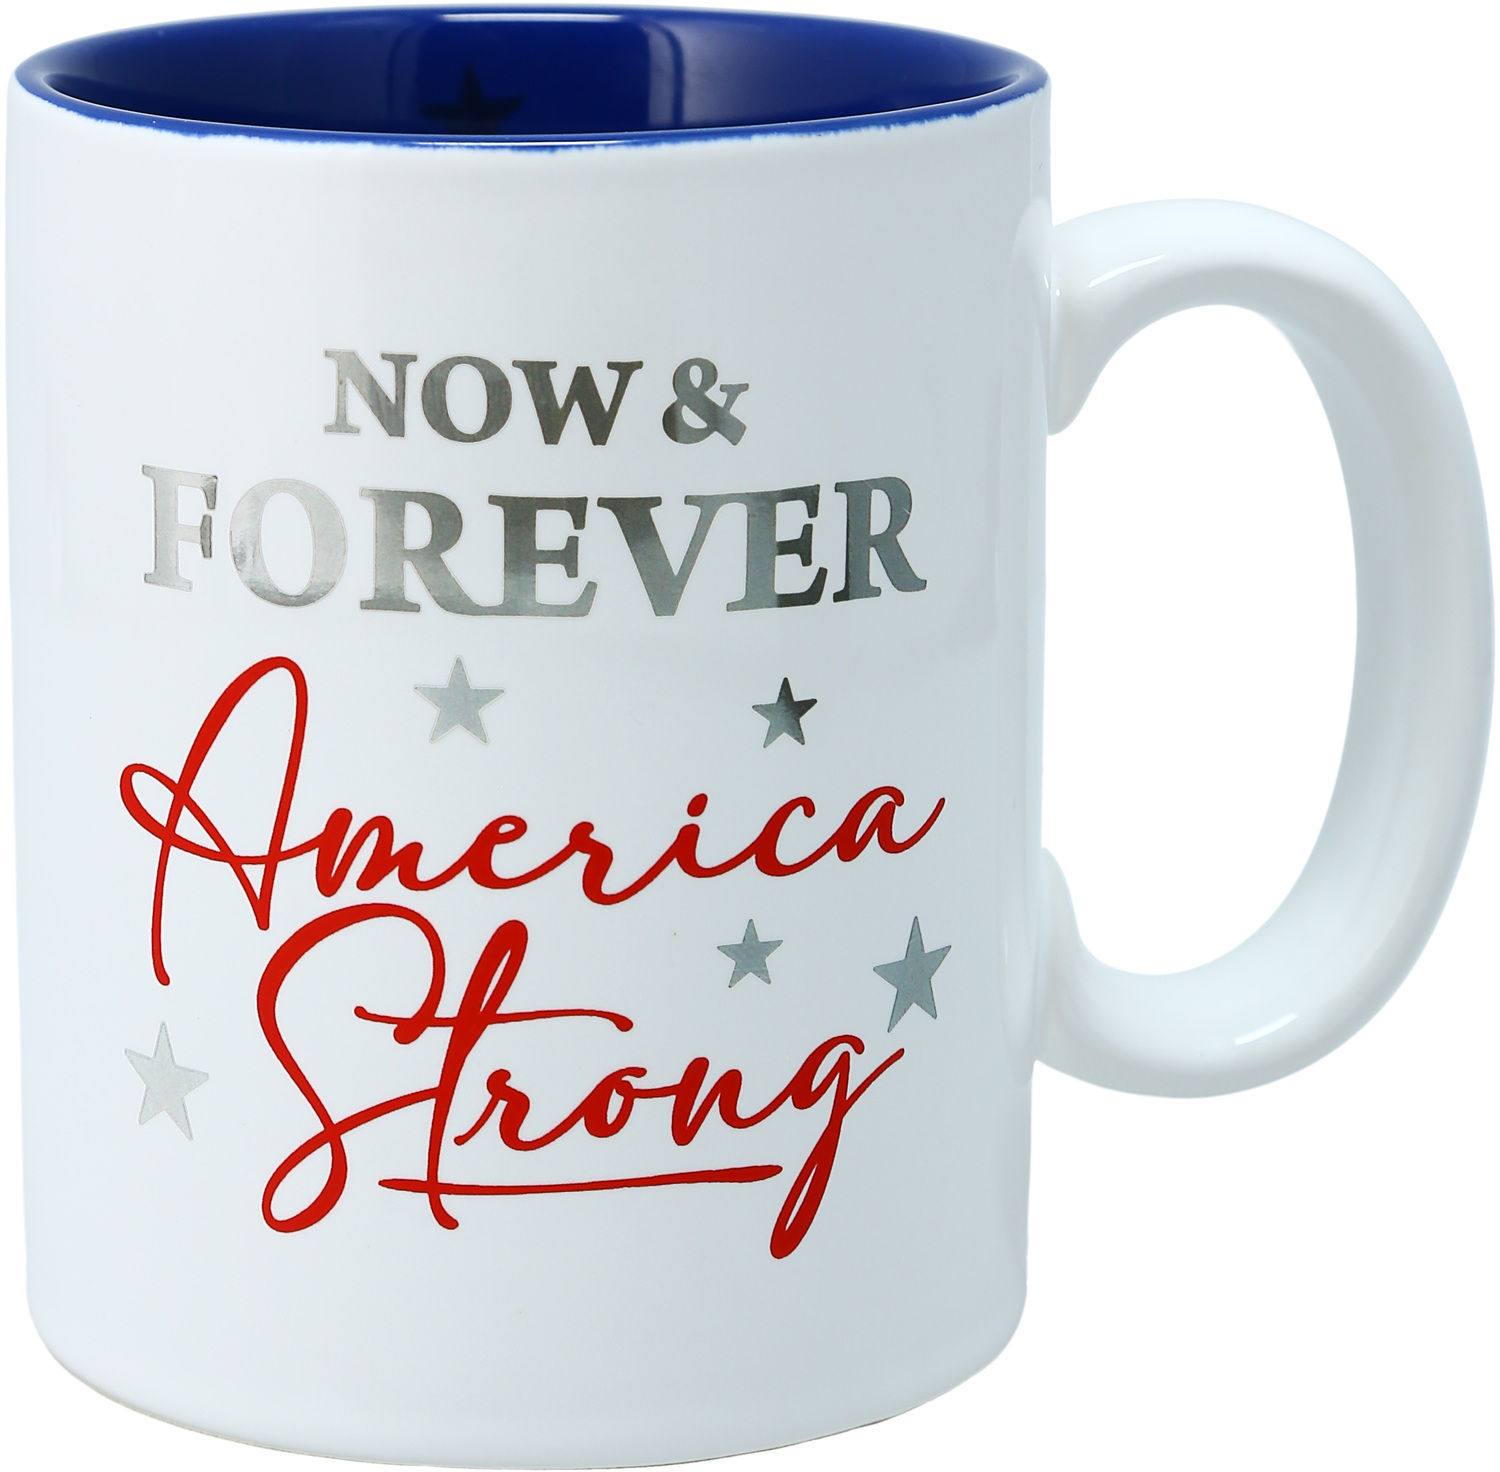 America Strong by Red, White, & Blue Crew - America Strong - 18 oz Mug